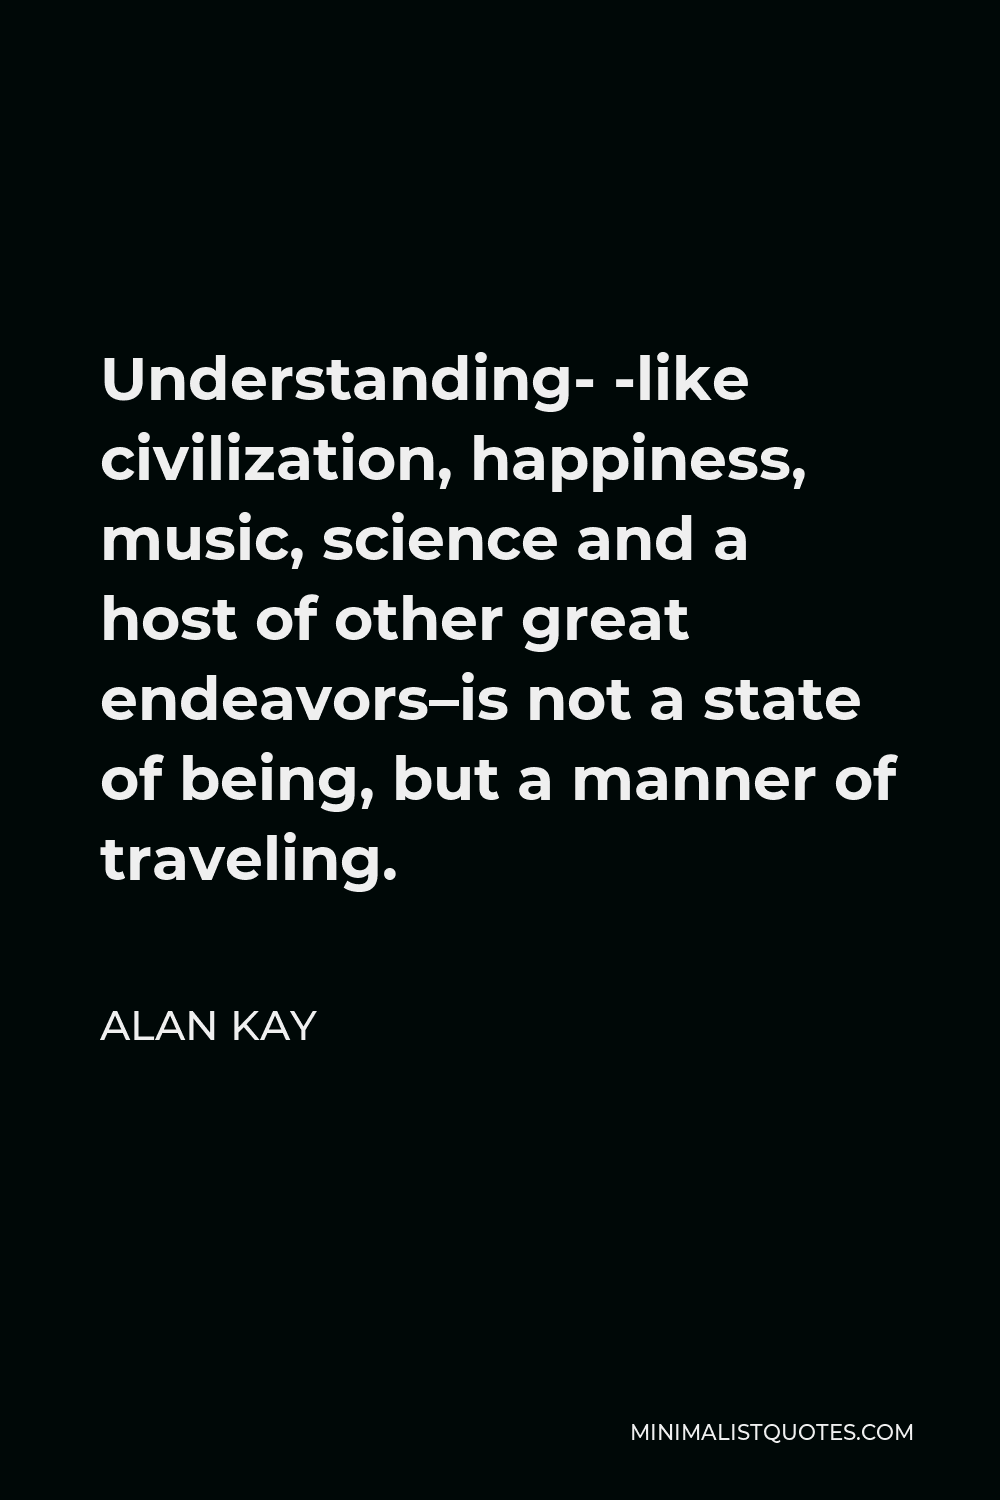 Alan Kay Quote - Understanding- -like civilization, happiness, music, science and a host of other great endeavors–is not a state of being, but a manner of traveling.